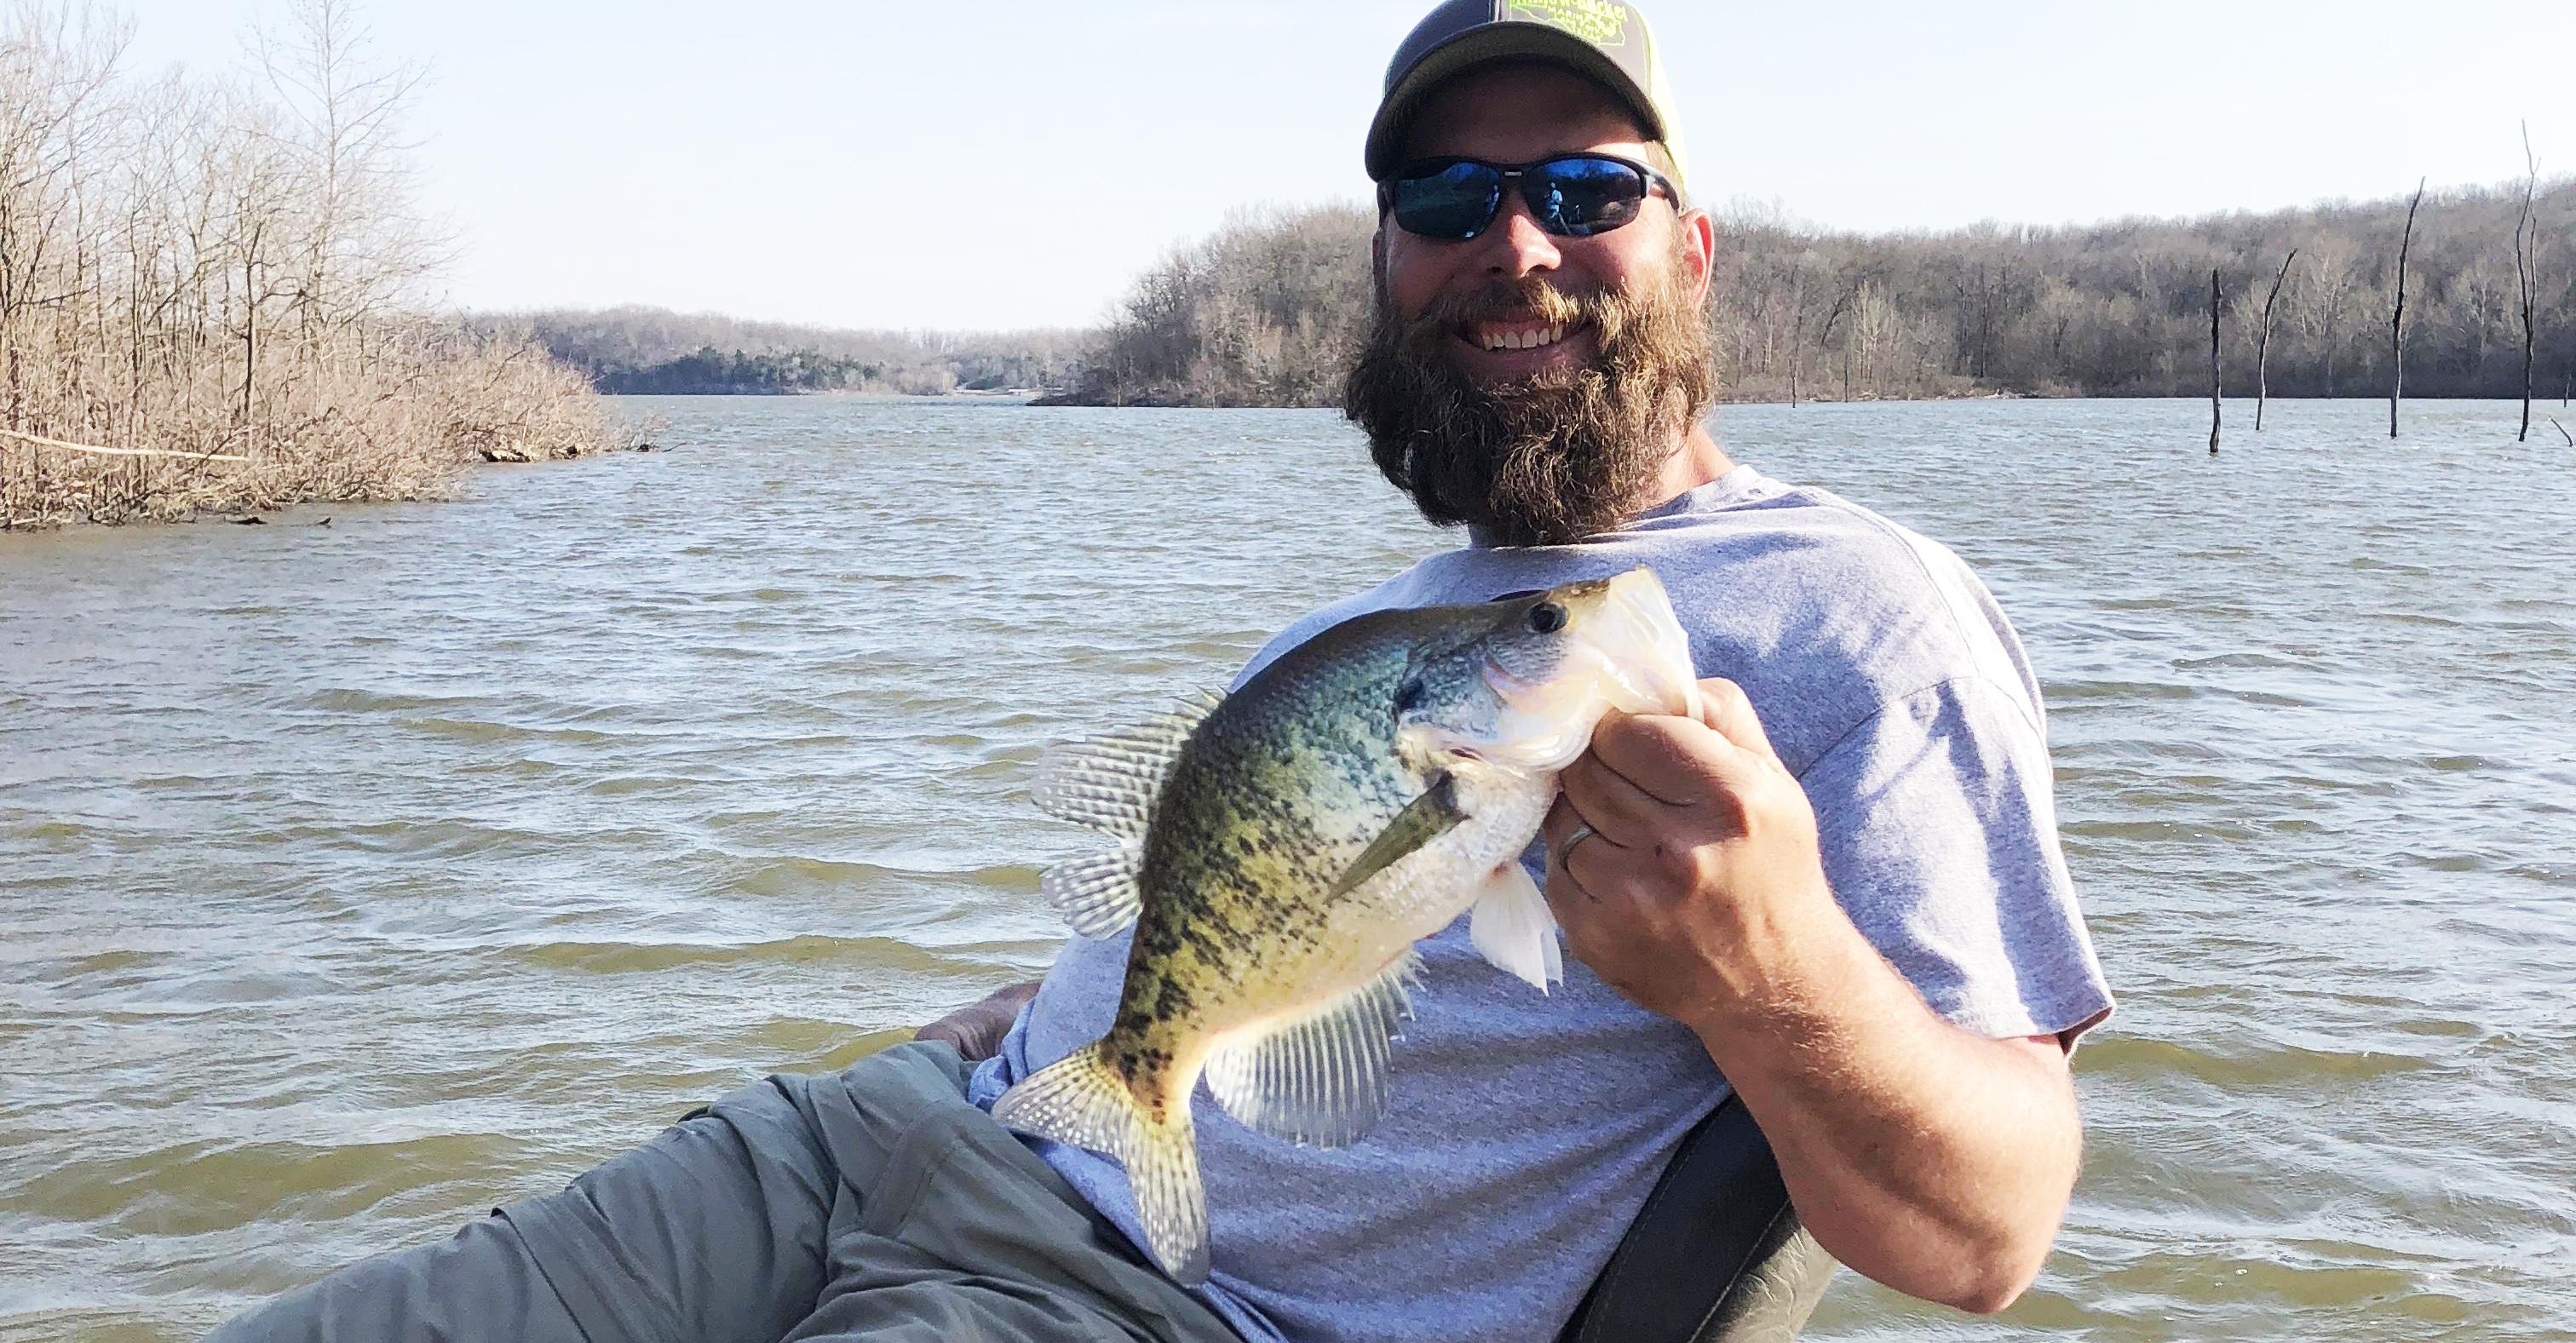 More information about "Crappie"